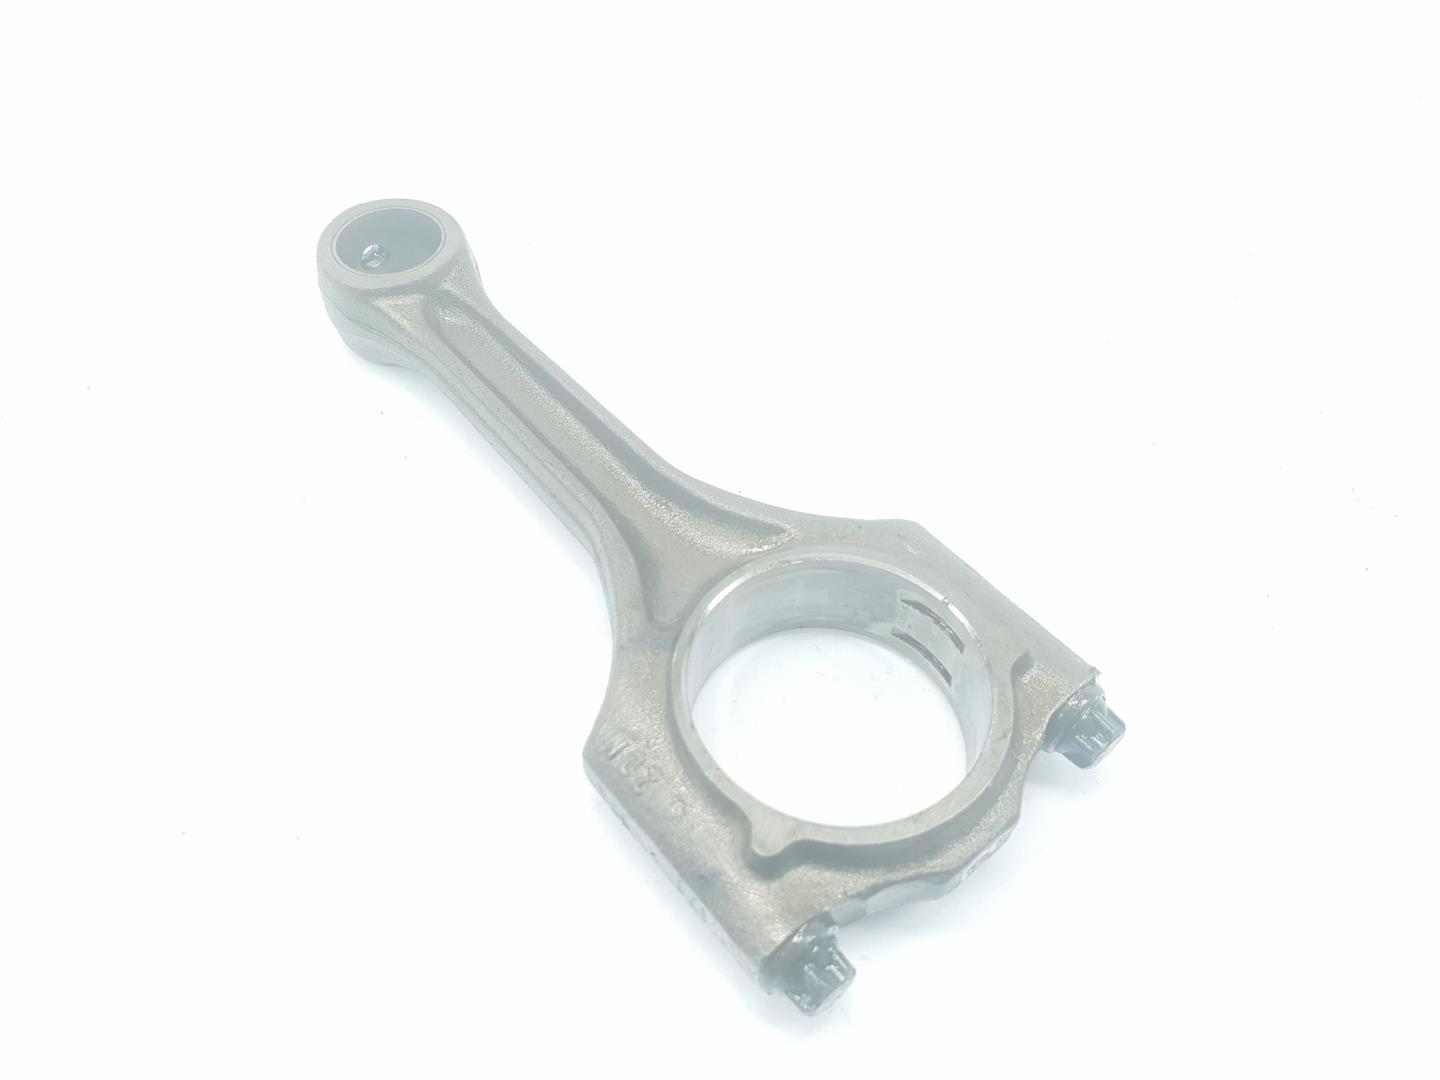 BMW 3 Series E36 (1990-2000) Connecting Rod 11241437617, 11241437617, 1111AA 24233734